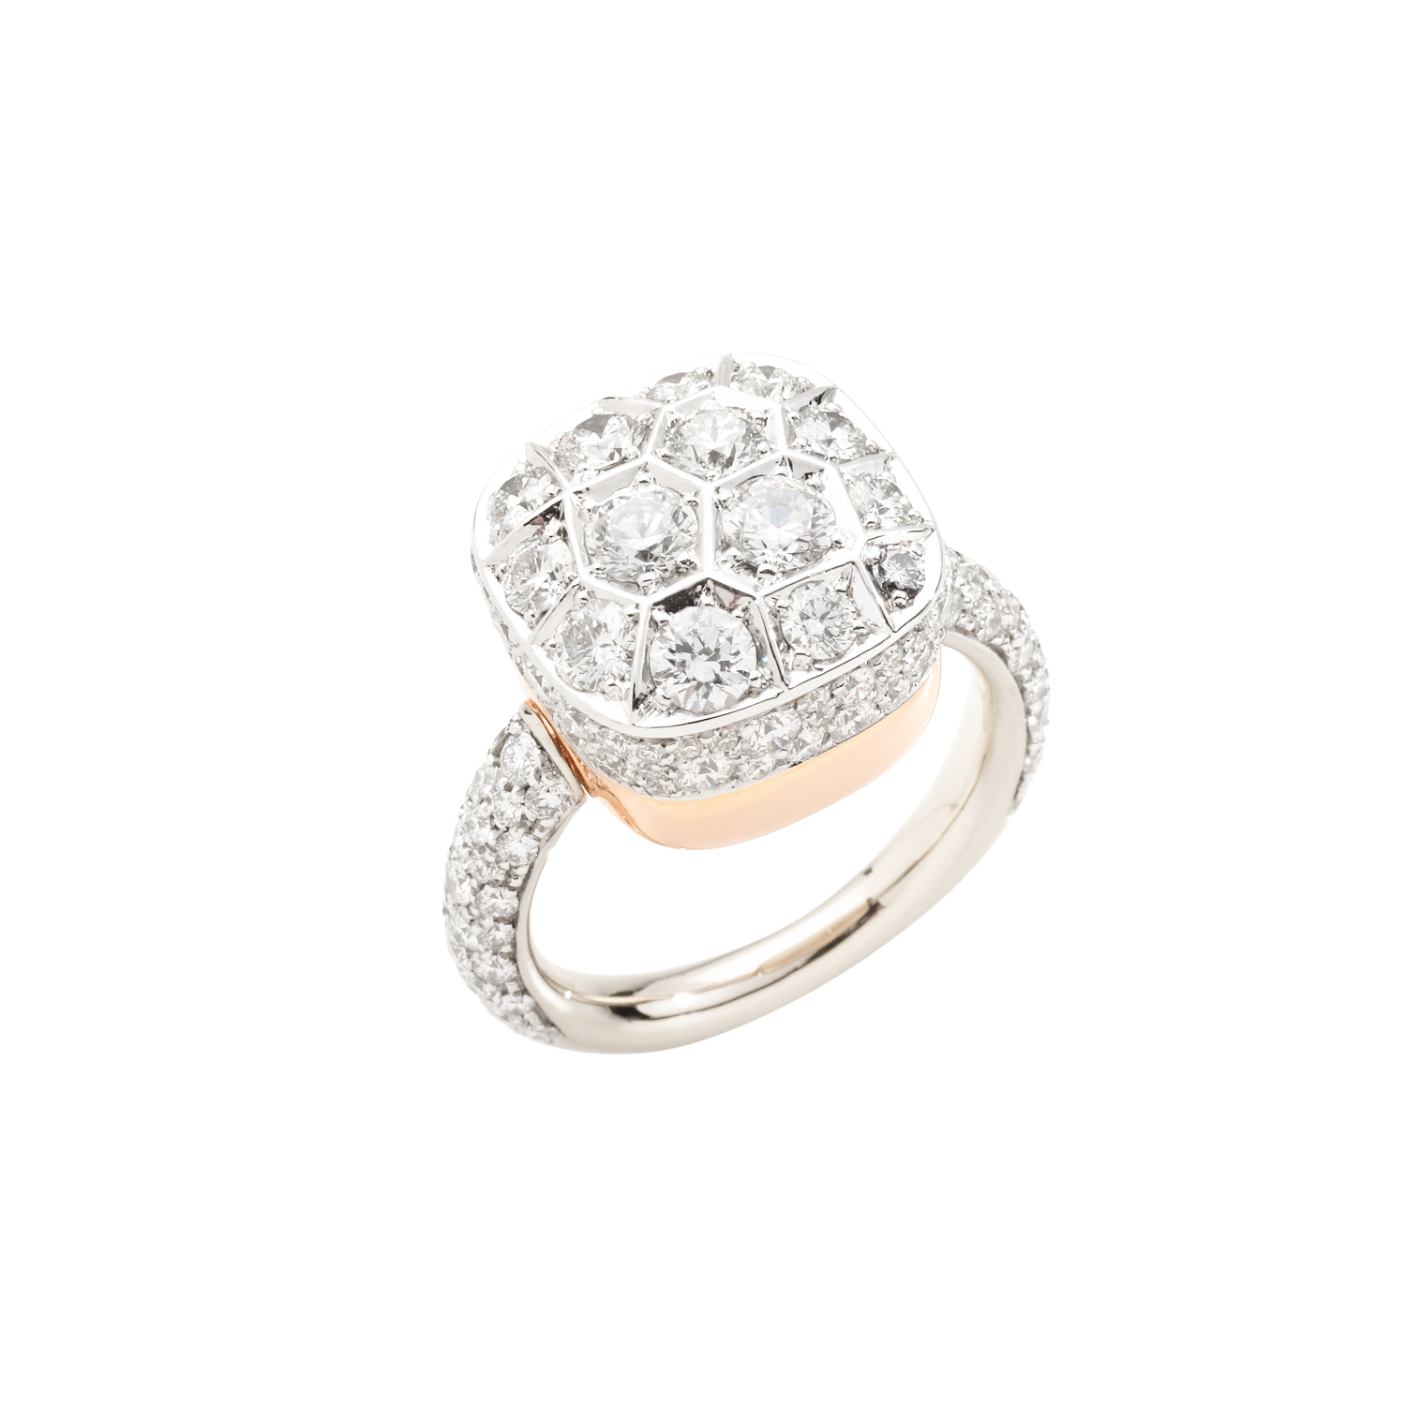 PAC2026_O6WHR_DB000_010_Pomellato_ring-nudo-solitaire-assoluto-white-gold-18kt-rose-gold-18kt-diamond.png